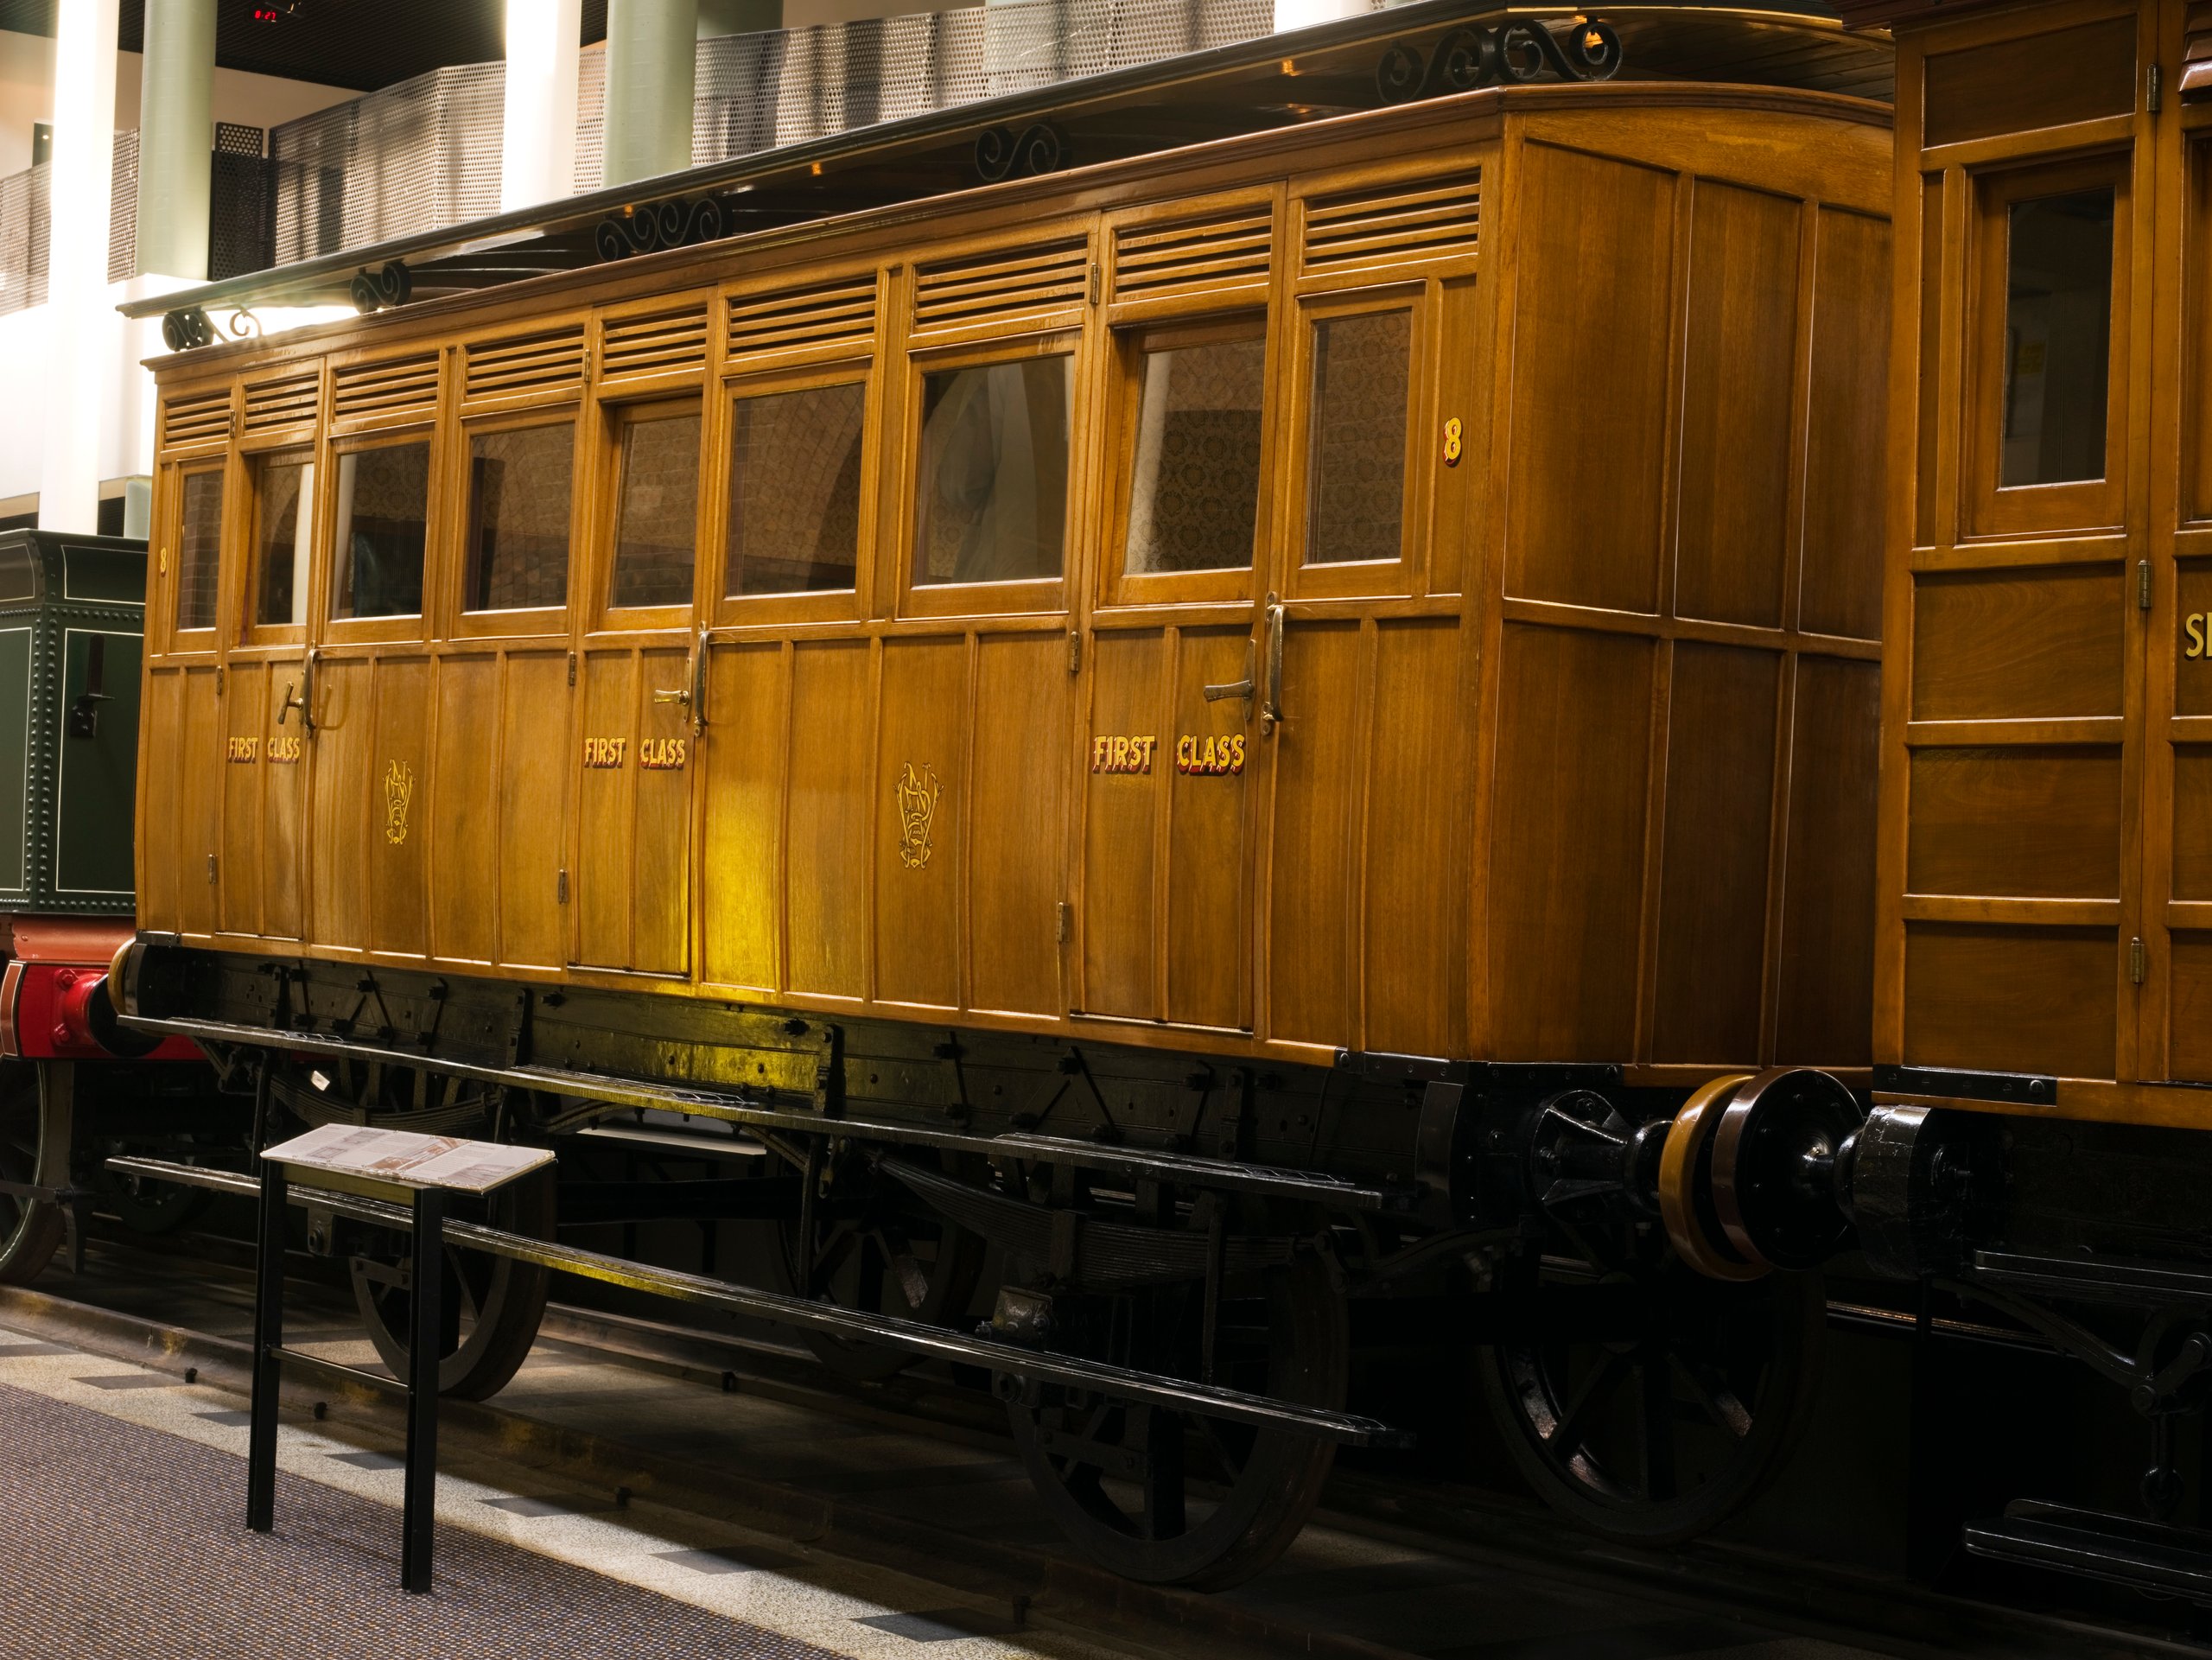 Railway carriage used on first railway in New South Wales